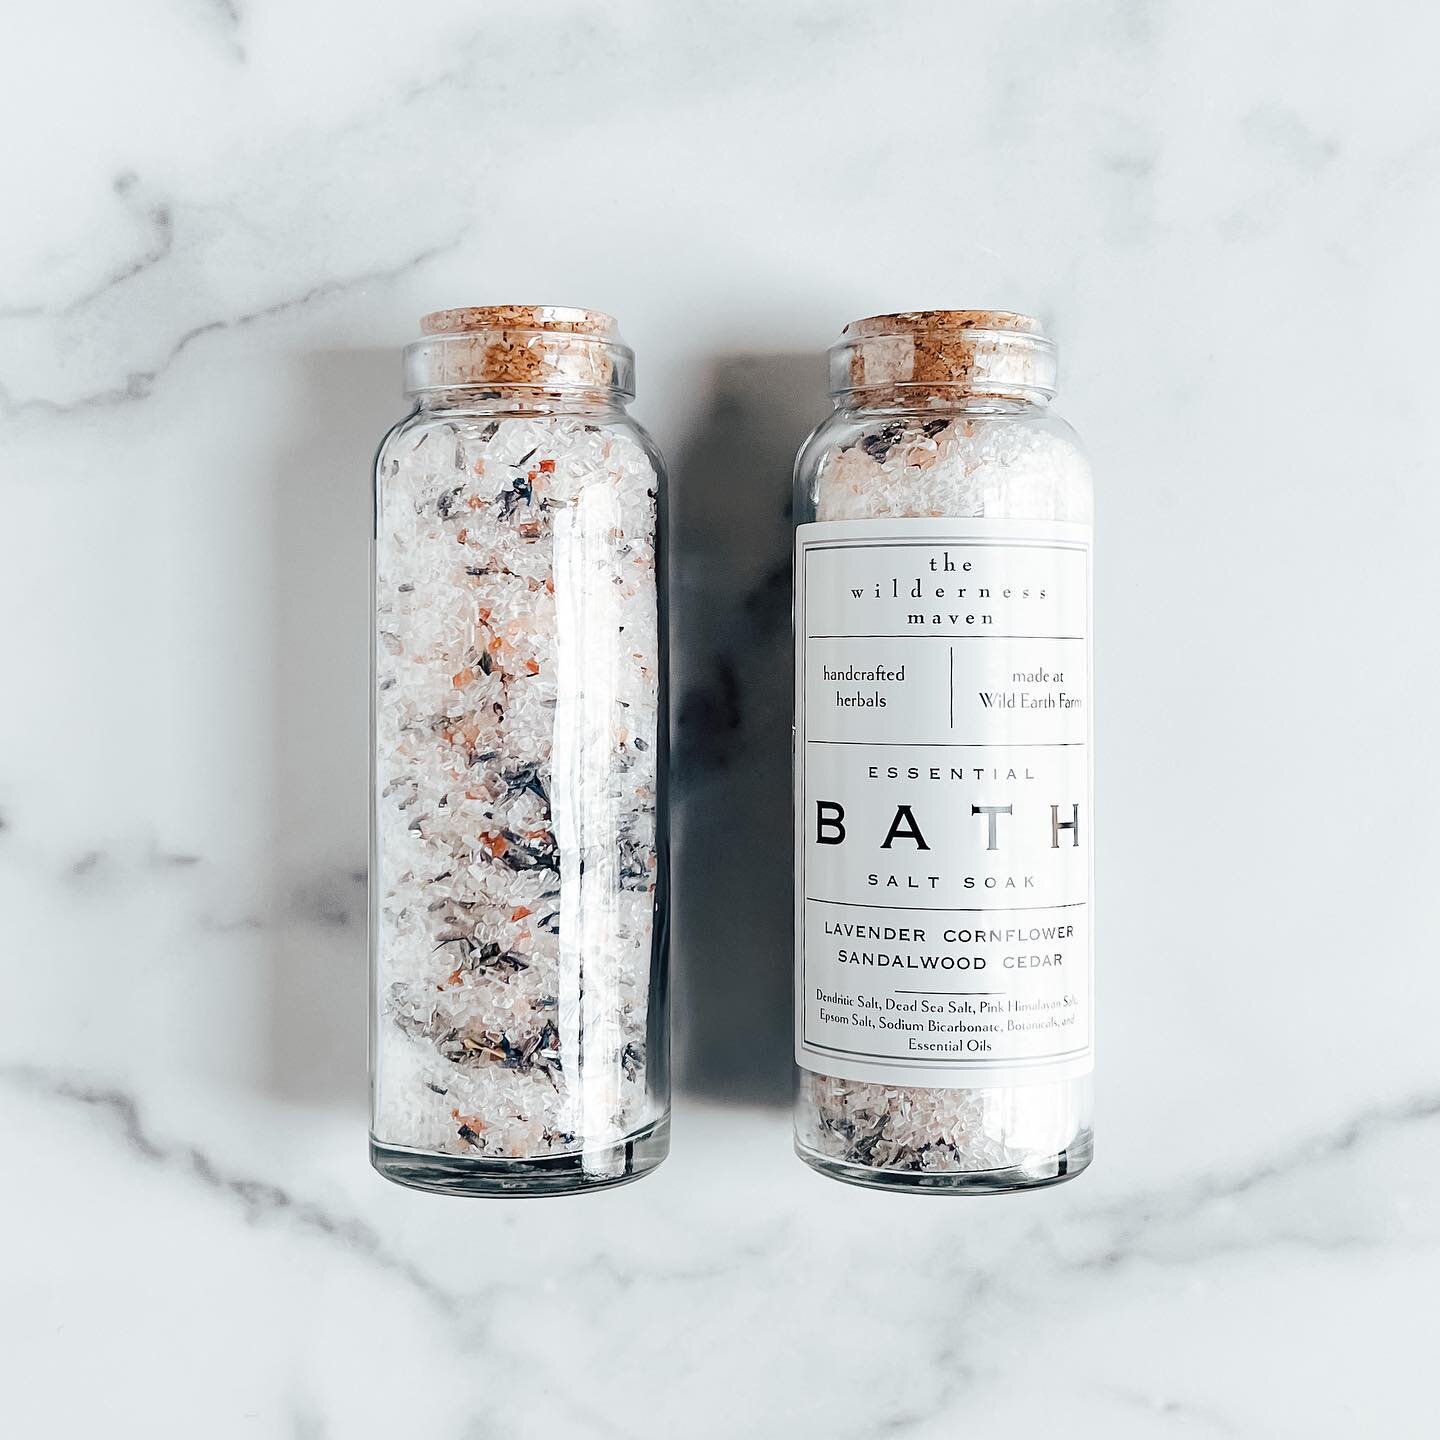 A hot bath may be the thing that sounds best to you right now, or not. But did you know that soaking in bath salts is so much more than just relaxing? These salts help to detox your body, pulling out harmful toxins through your skin. And they repleni